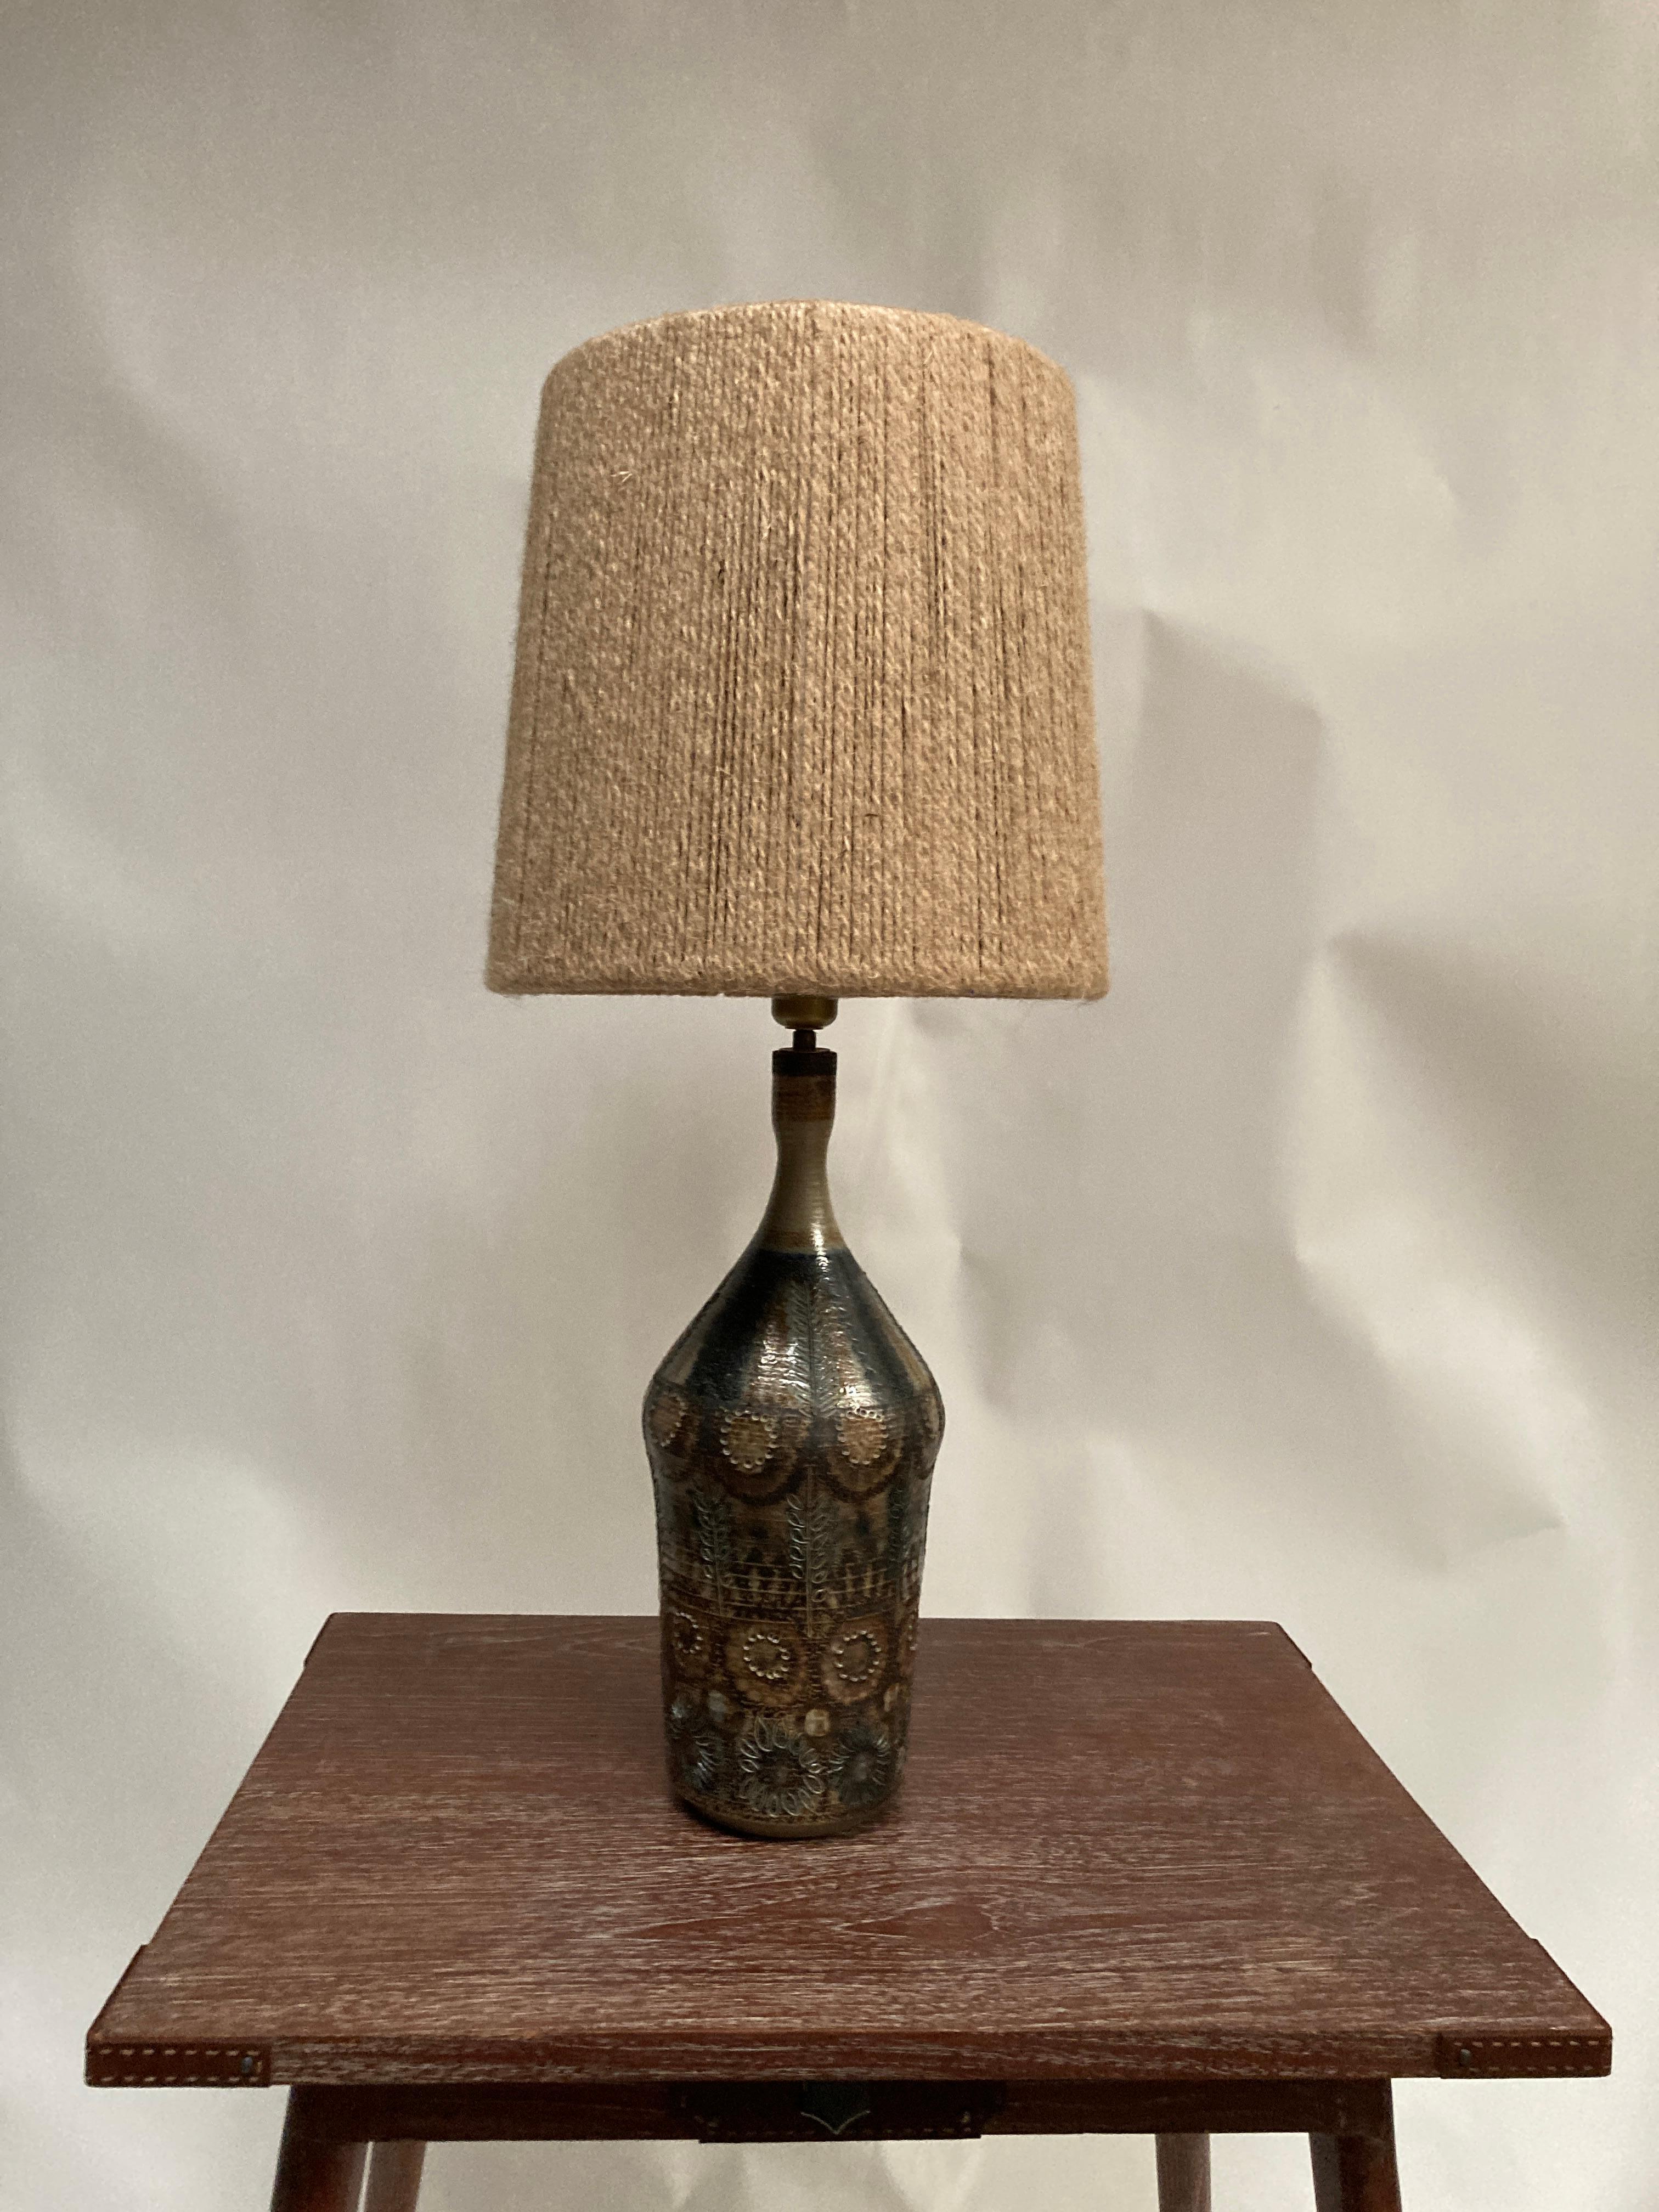 One of a kind Studio pottery ceramic lamp 
Hand made 
Dimensions given without shade
No shade included